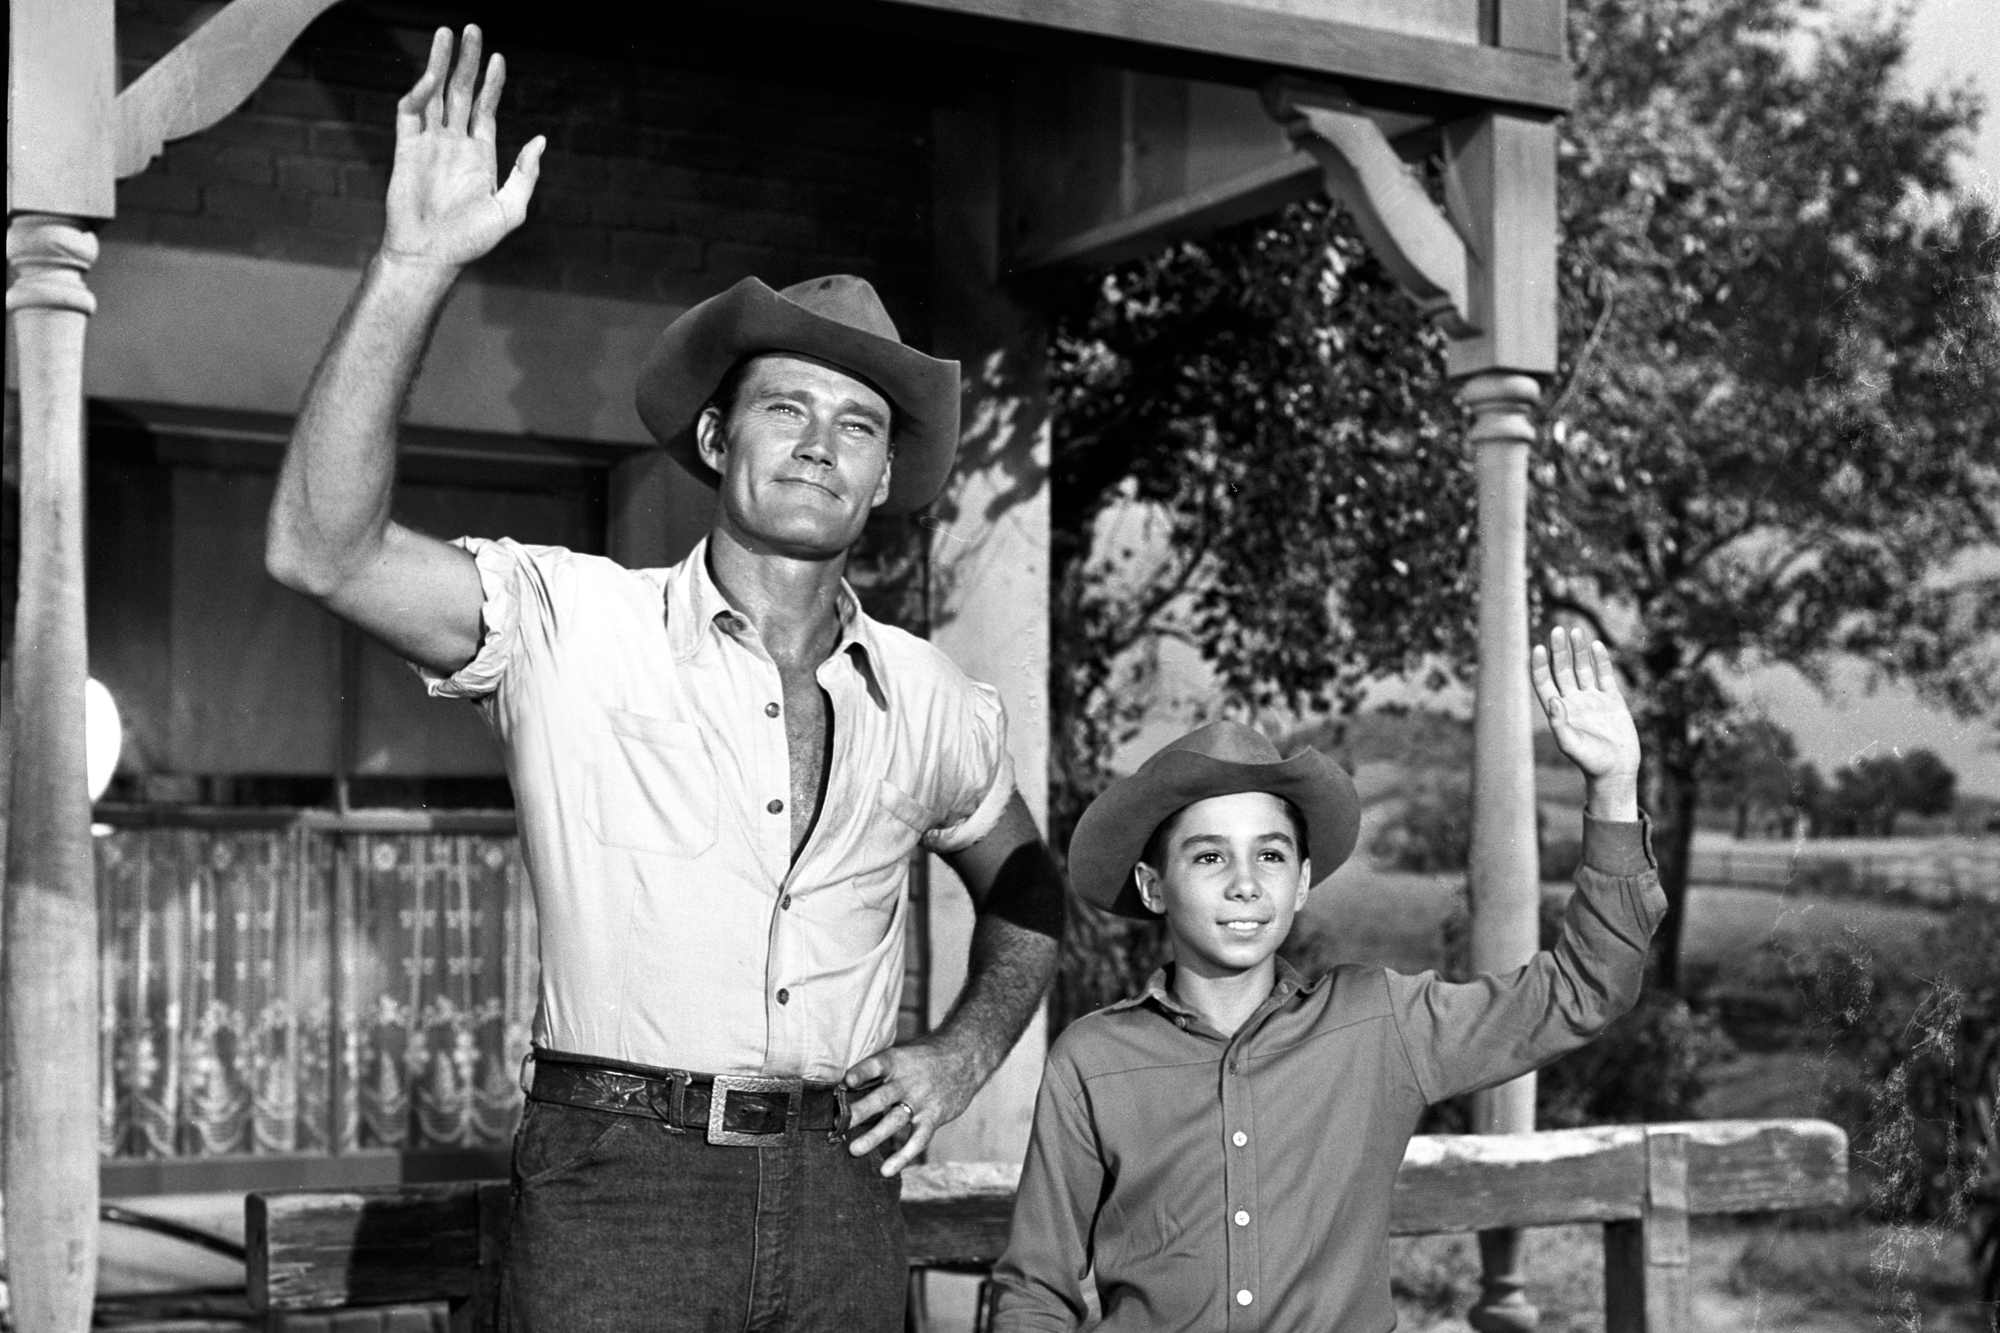 'The Rifleman' Chuck Connors as Lucas and Johnny Crawford as Mark McCain waving in front of a house.